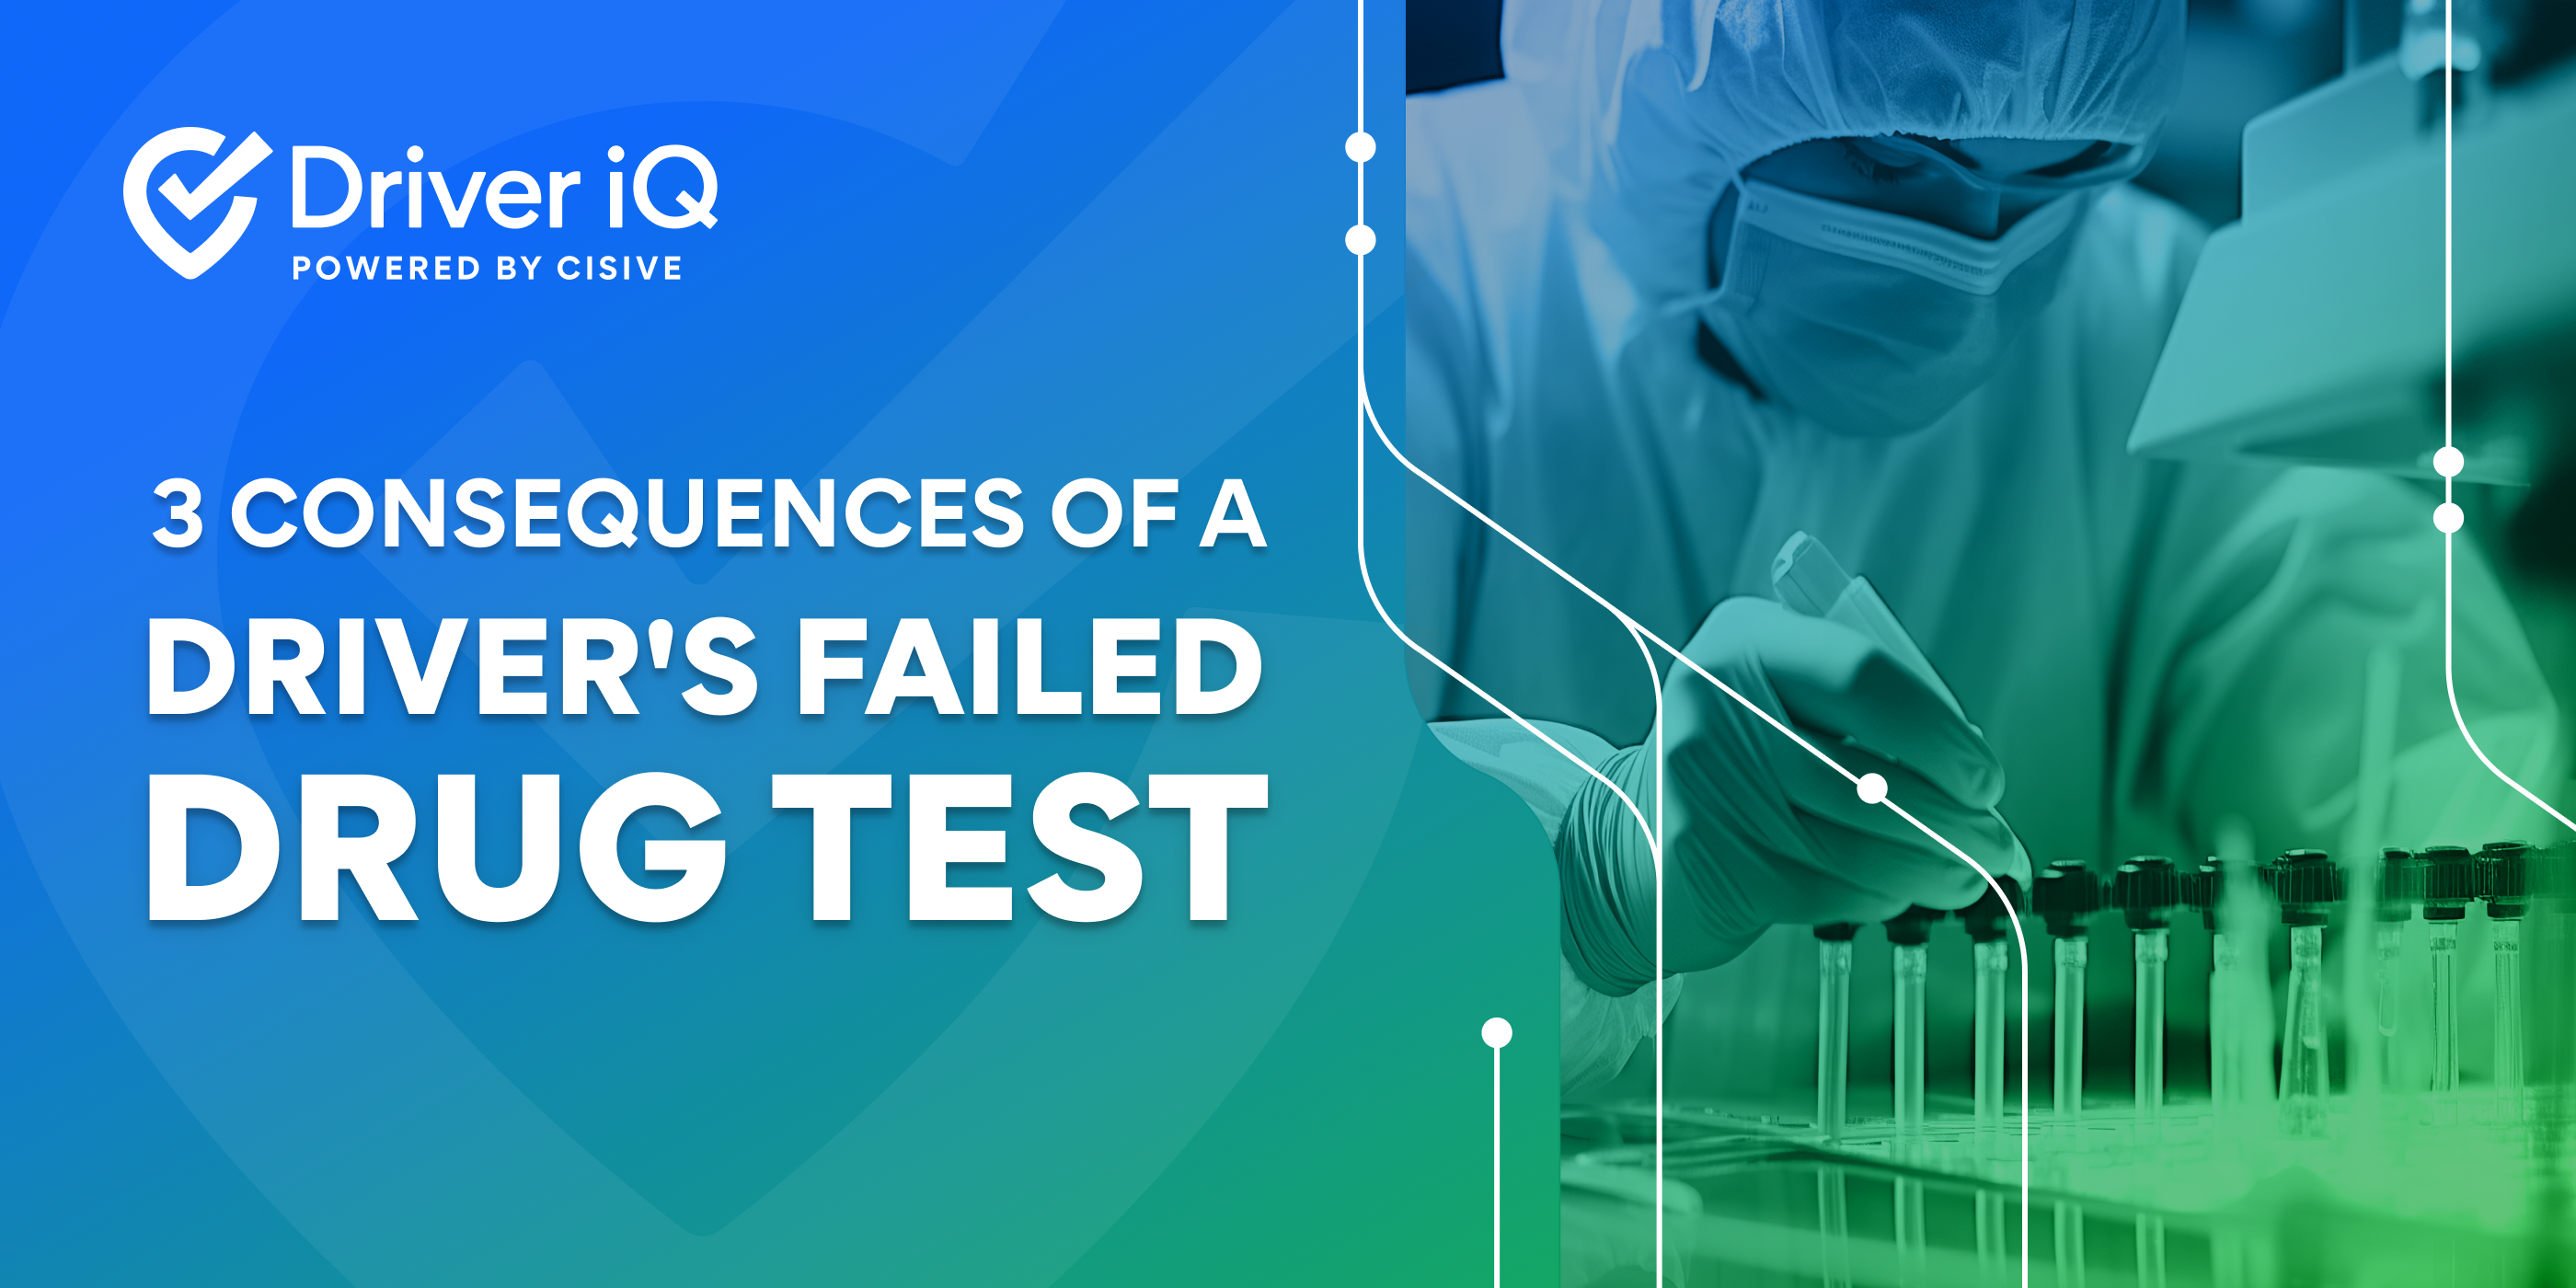 Driver iQ, Powered by Cisive. 3 Consequences of a Driver's Failed Drug Test.